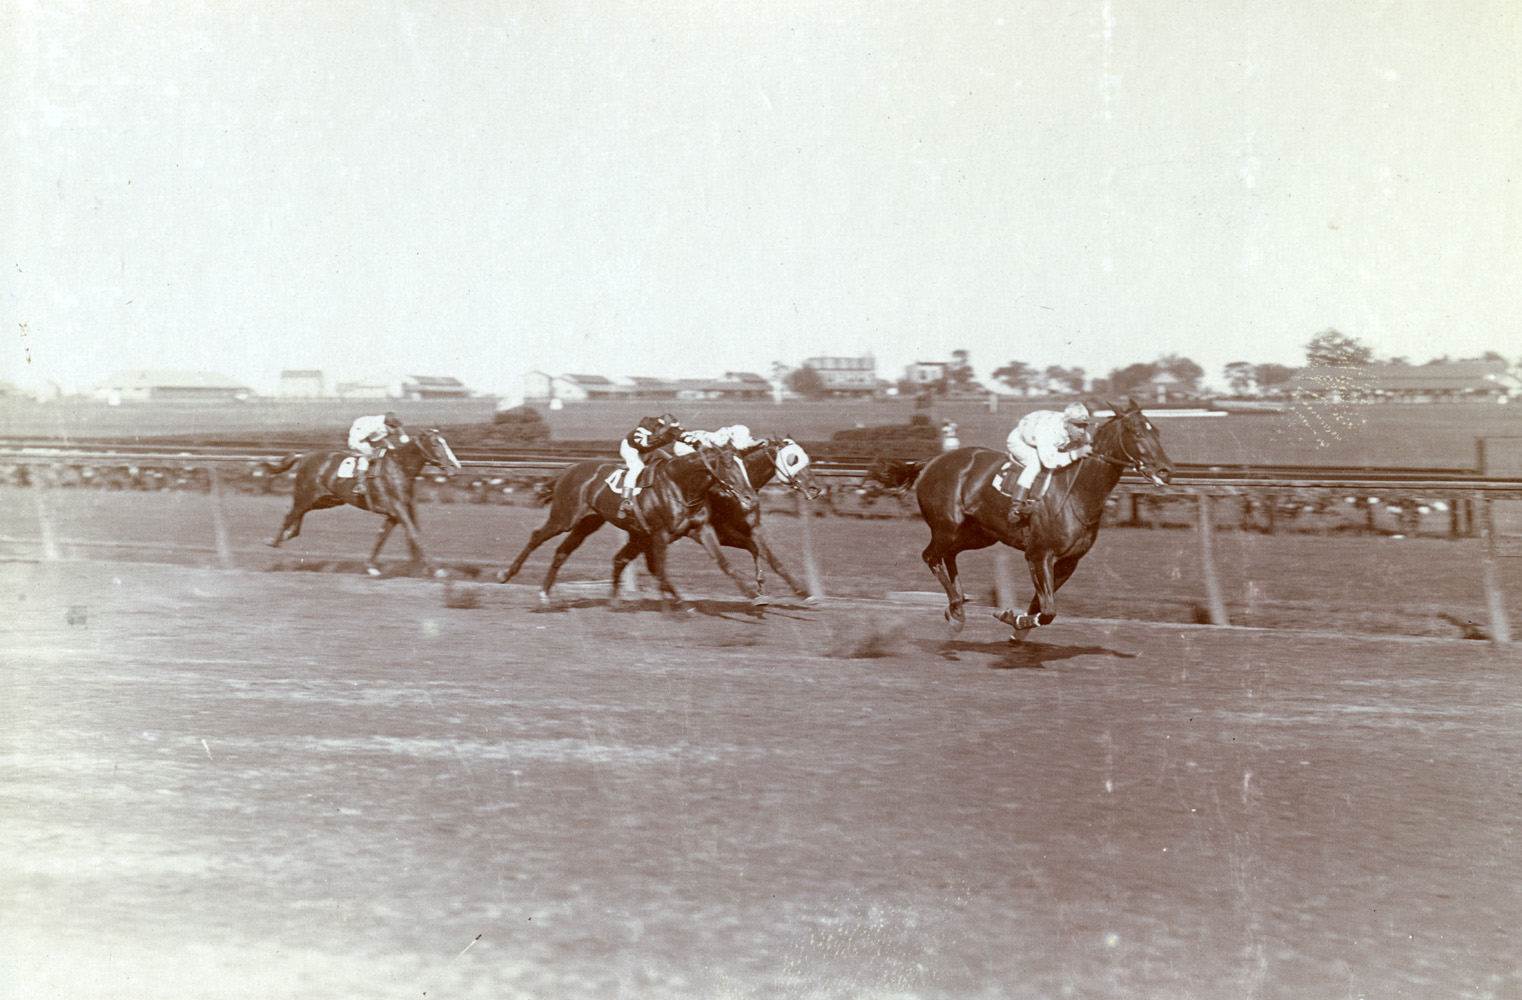 Maskette (Joe Notter up) wnning the 1908 Futurity at Sheepshead Bay (Keeneland Library Hemment Collection)